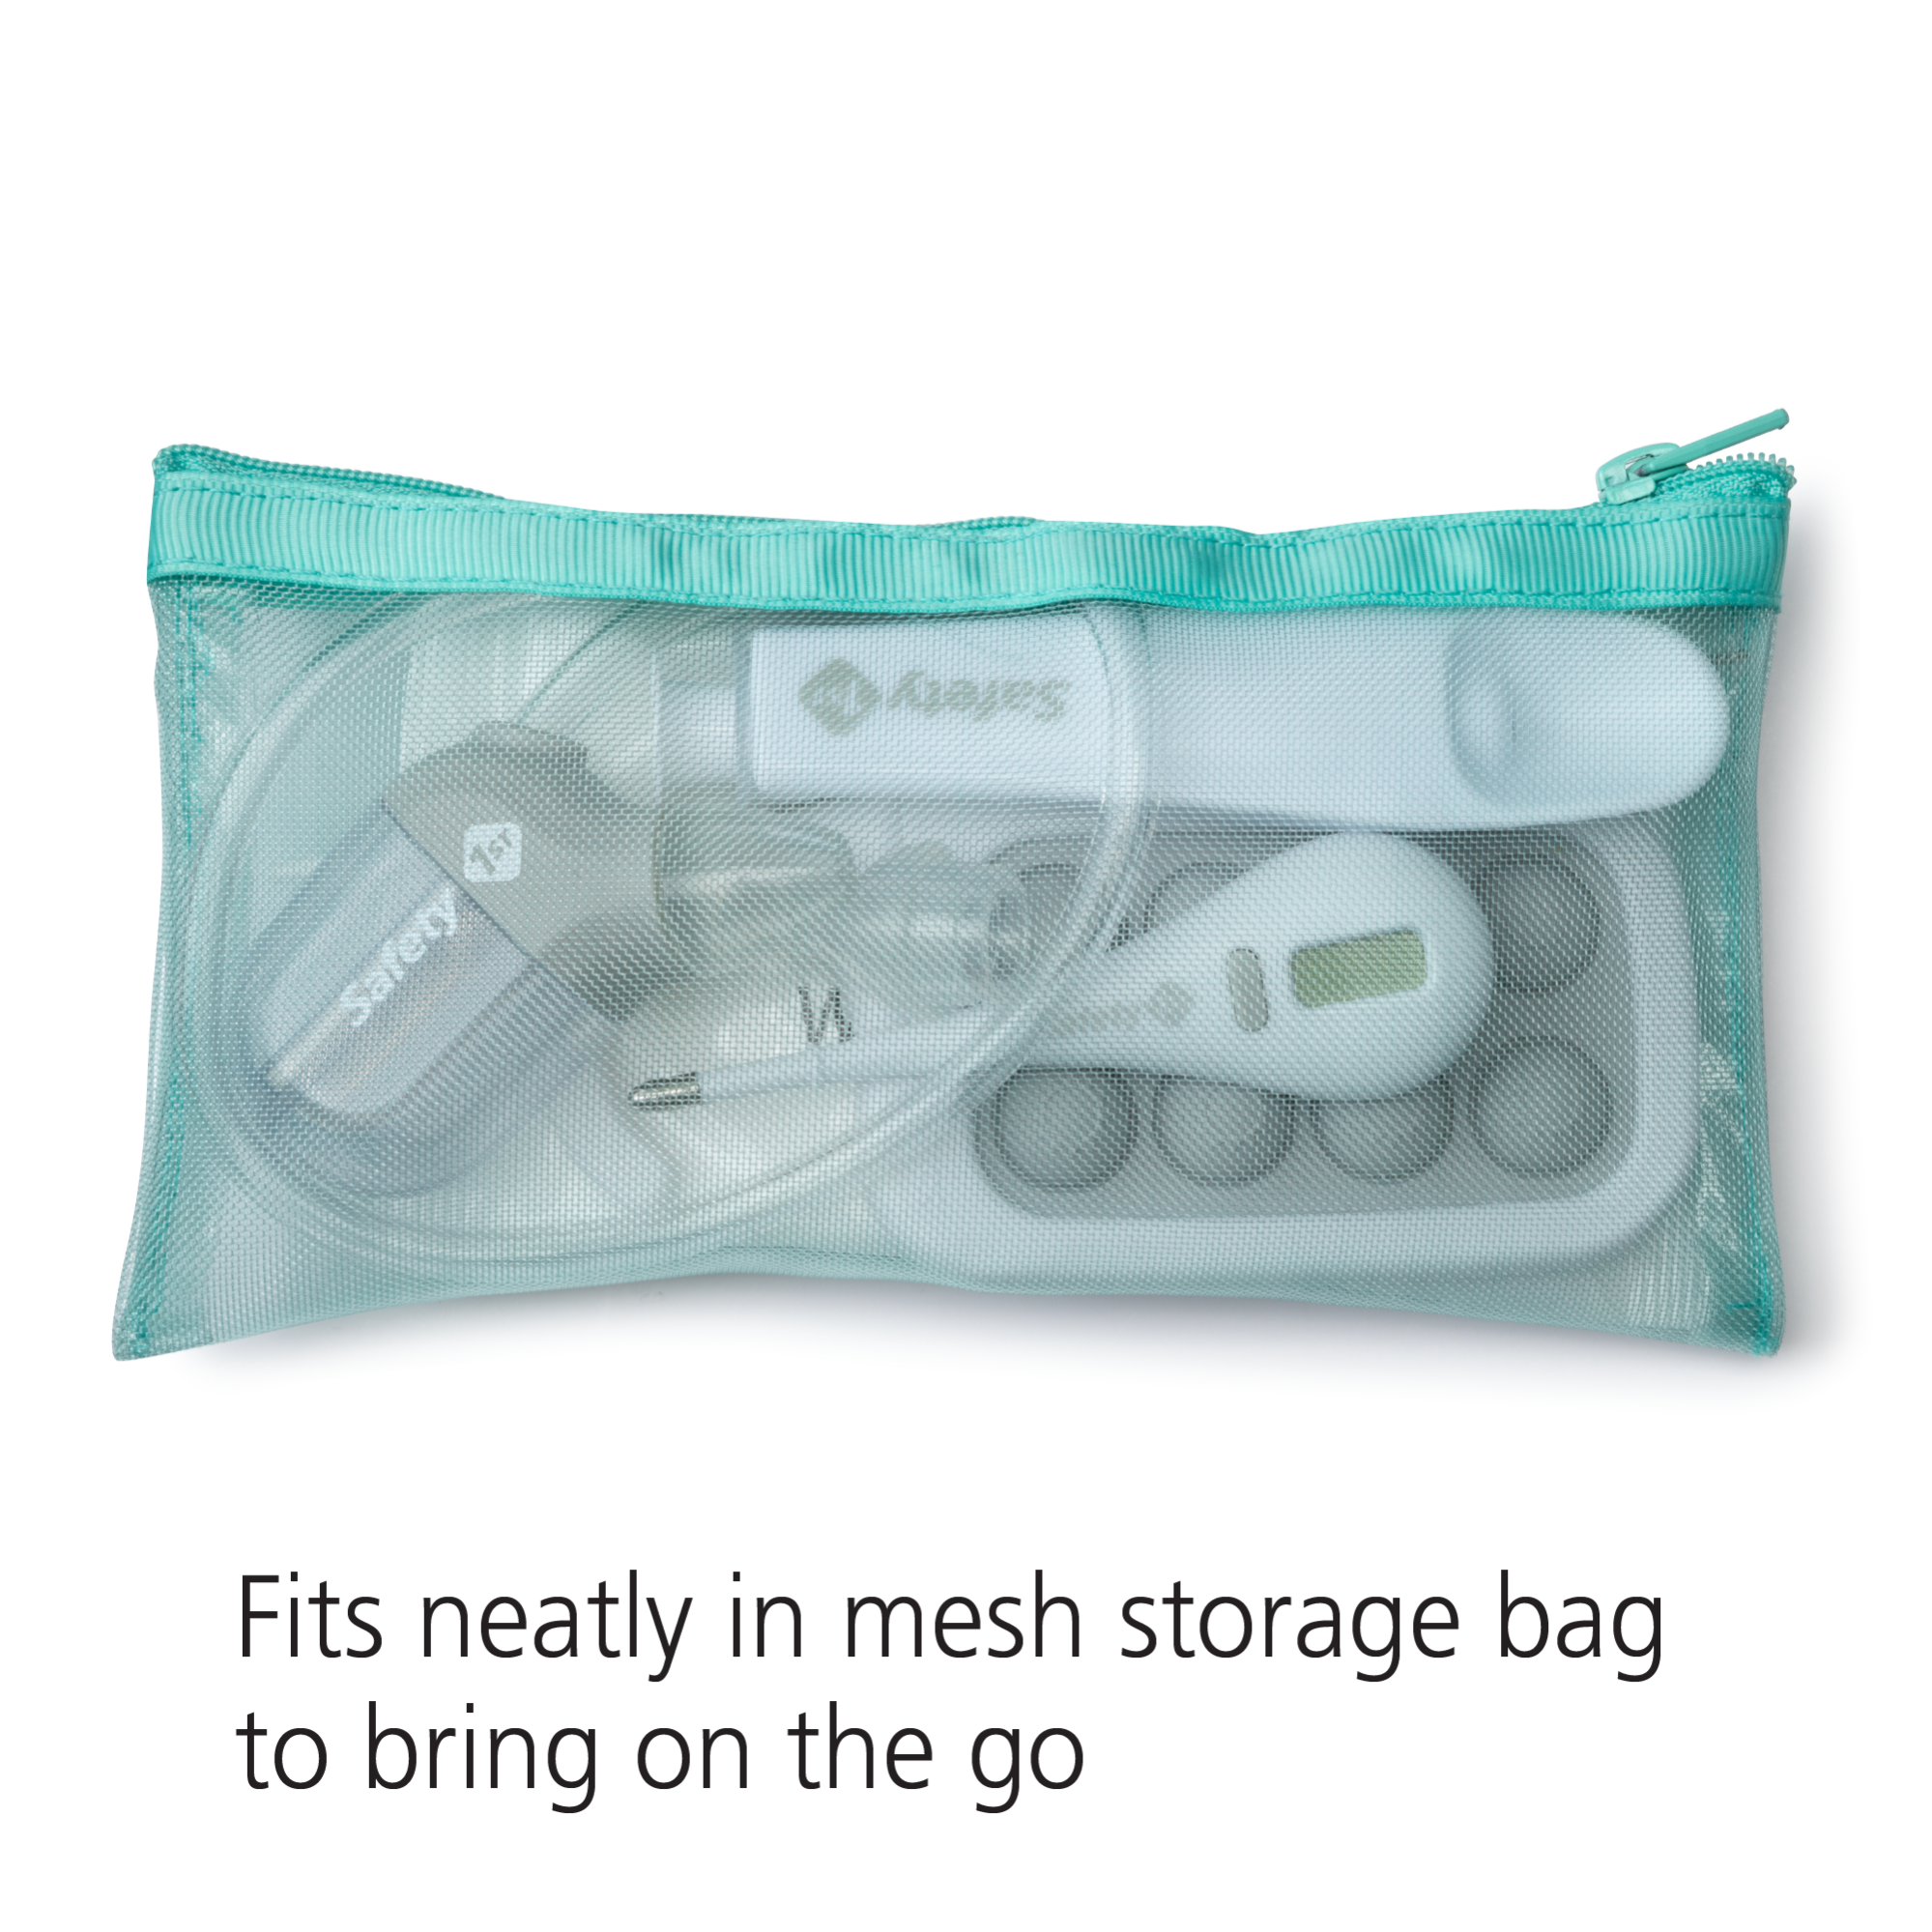 Fits neatly in mesh storage bag to bring on the go